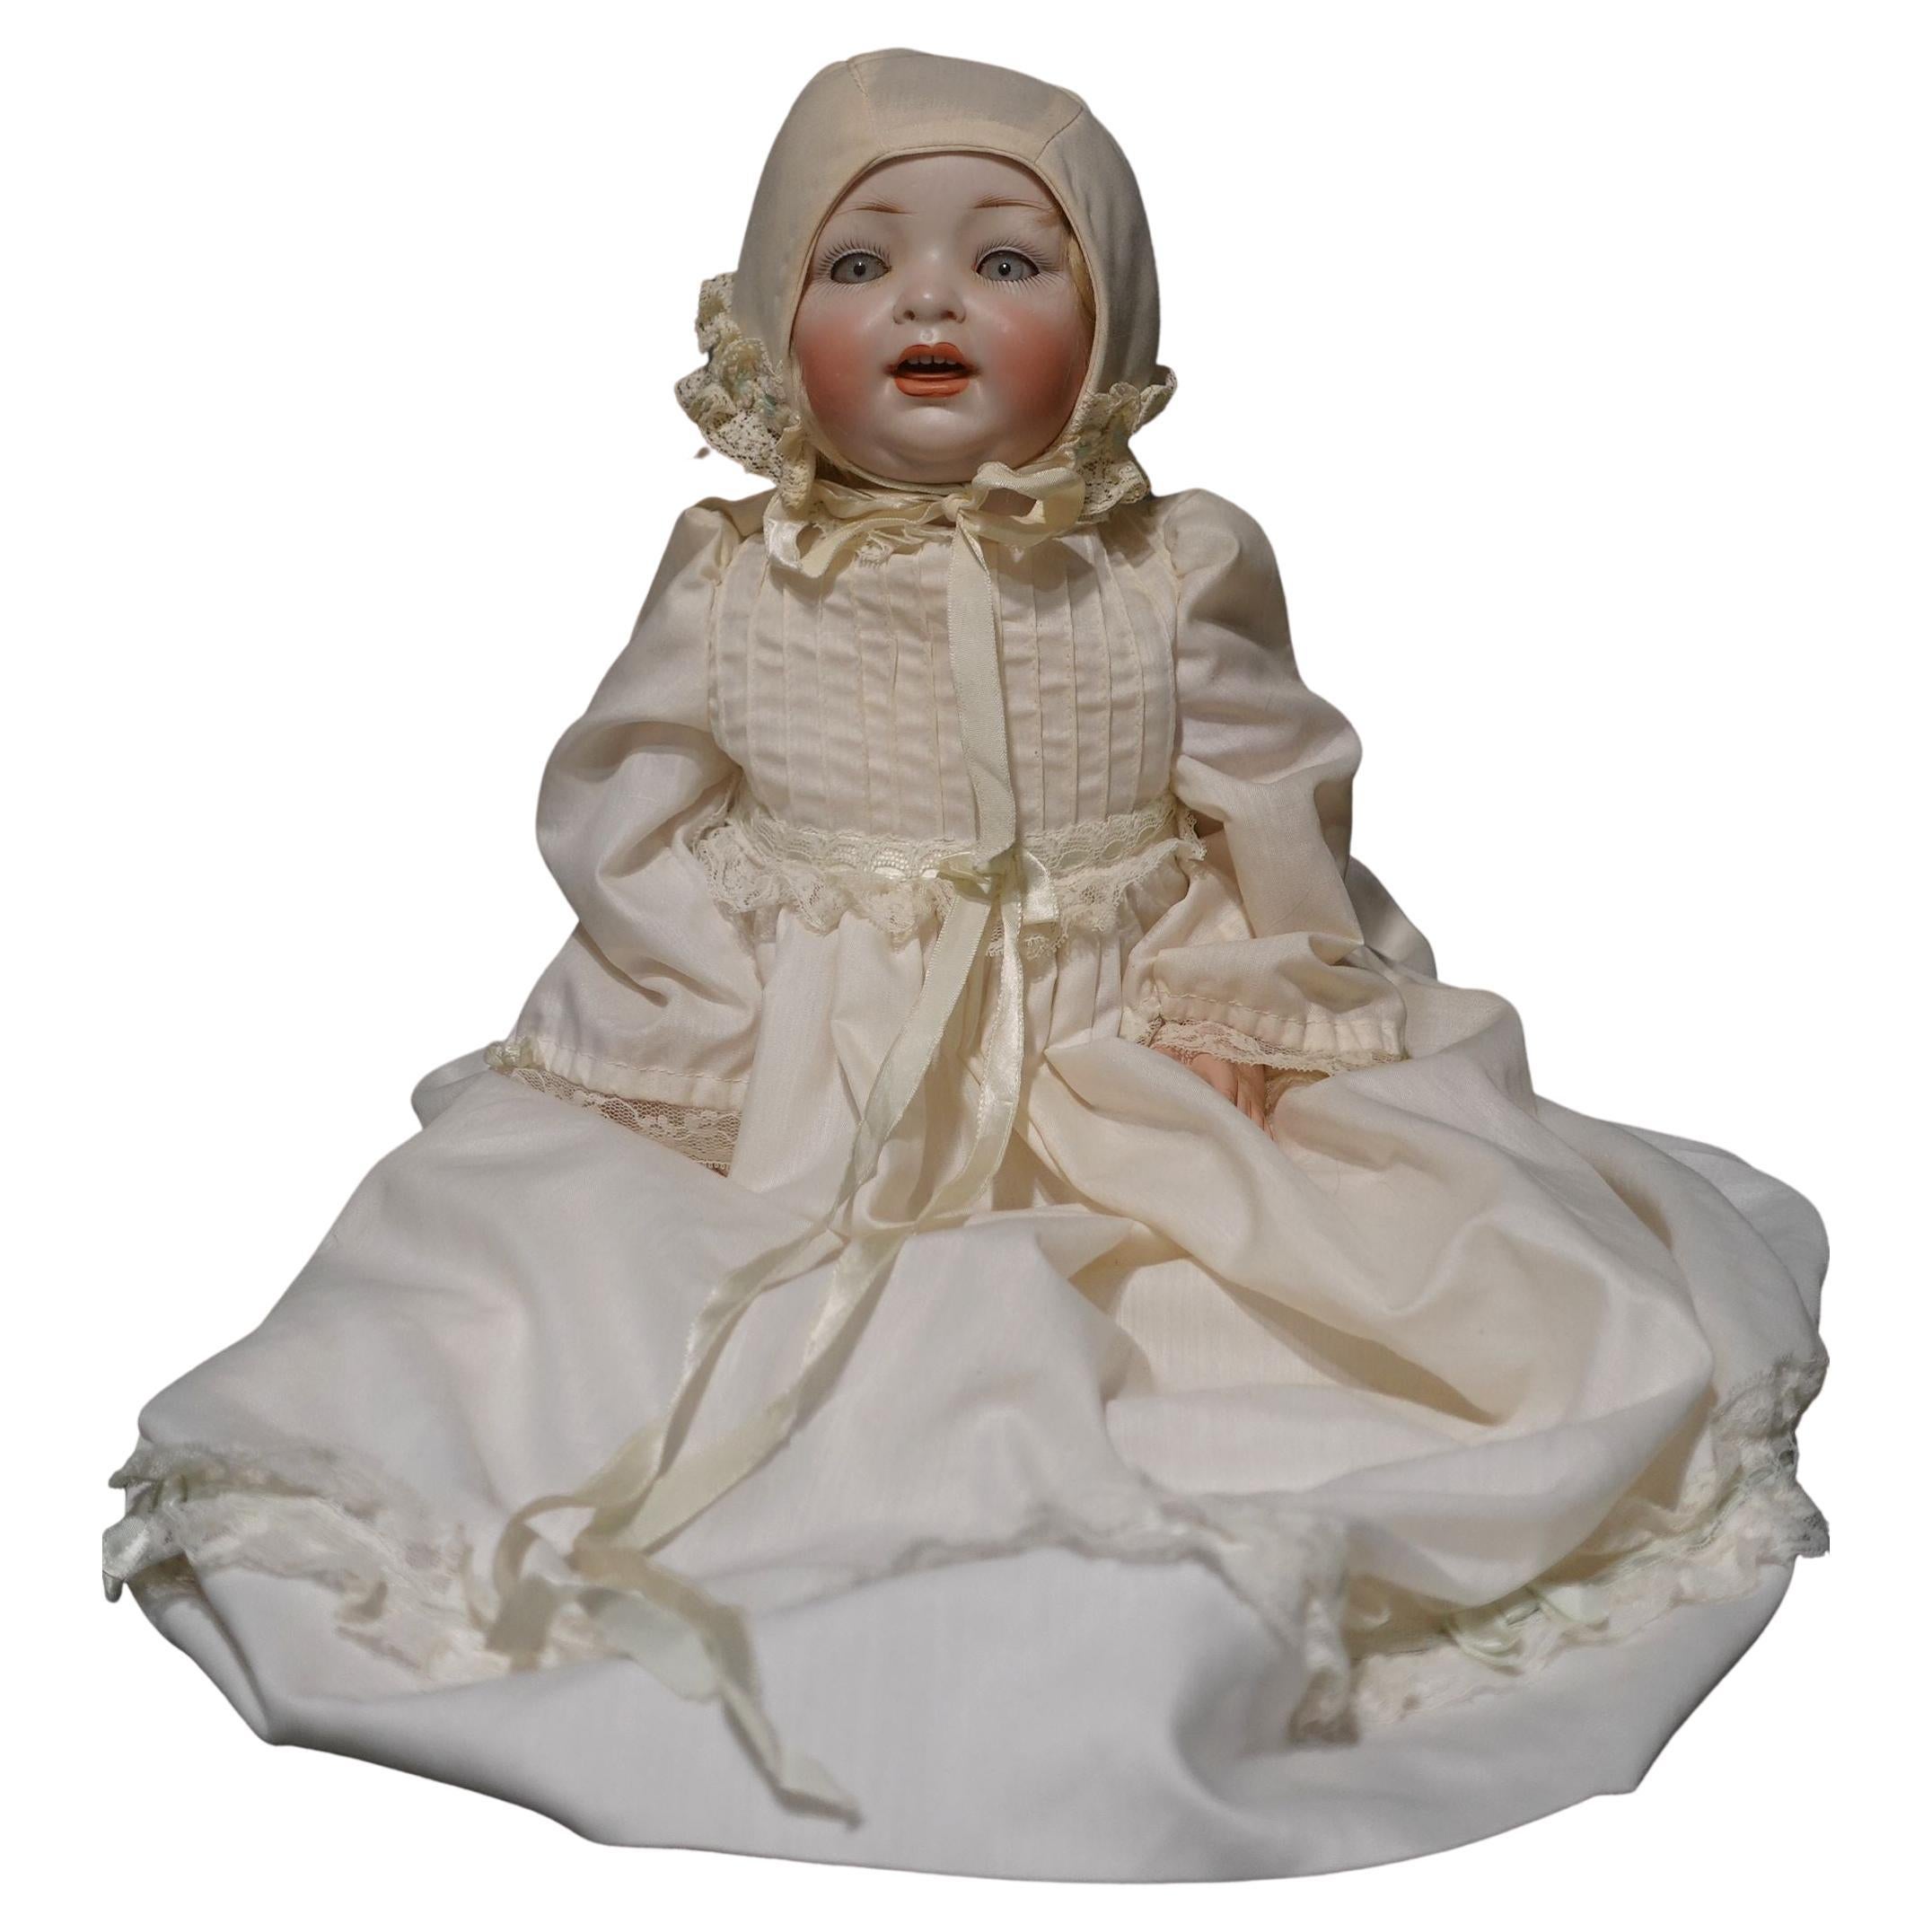 Antique German Bisque Doll #152/6 "Our Baby" by Hertel Schwab for L.W & CO.